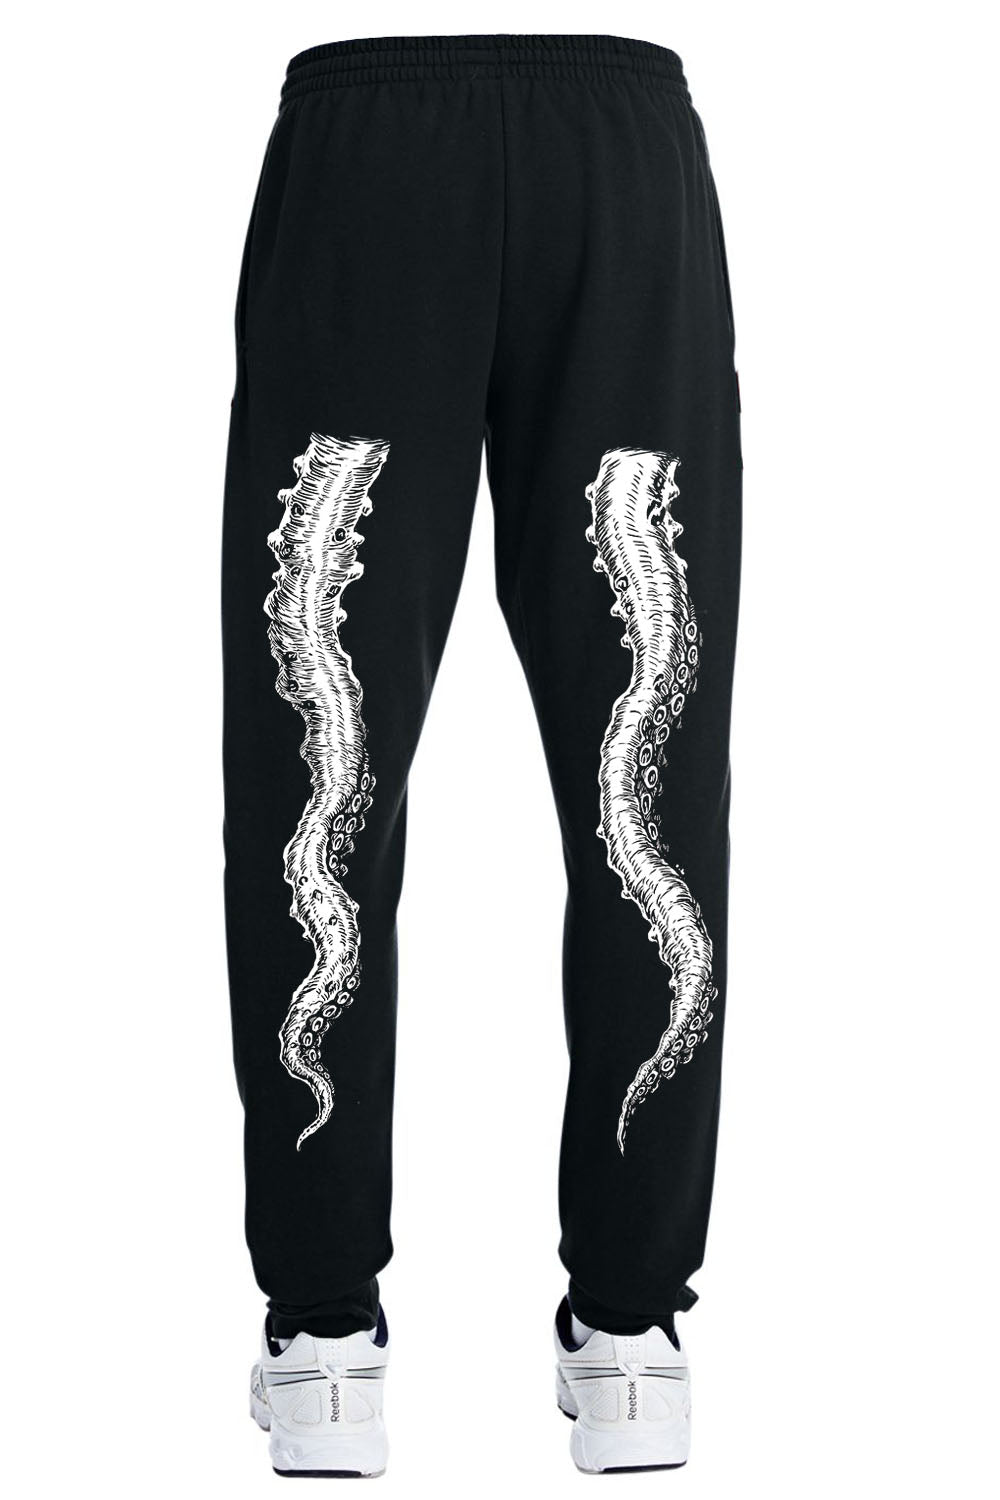 The Call of Cthulhu Joggers